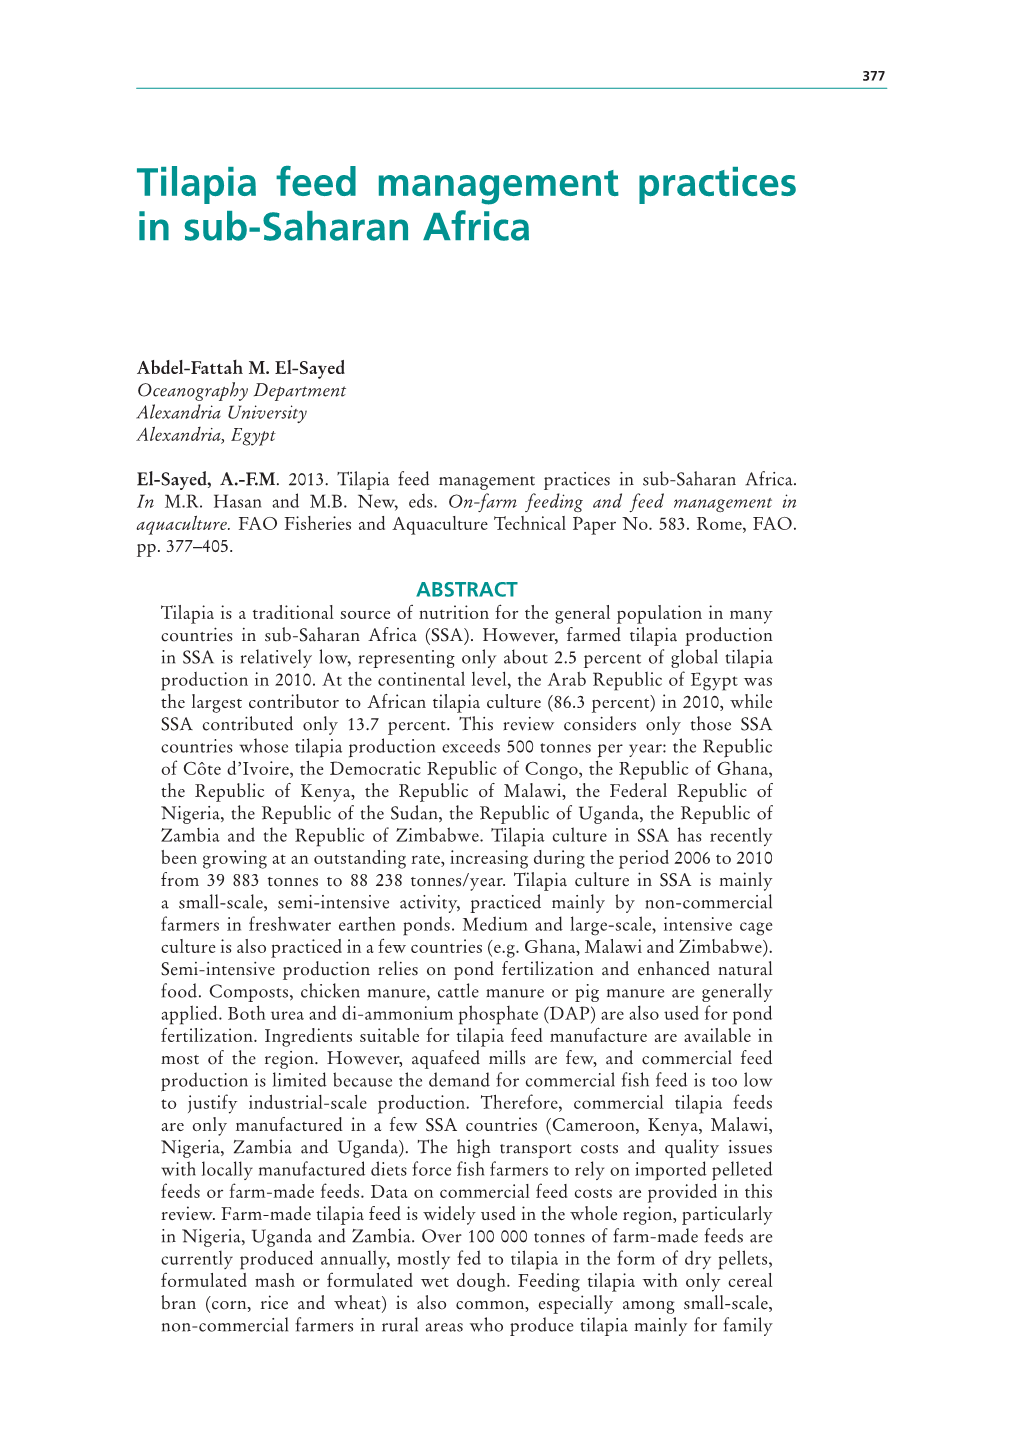 Tilapia Feed Management Practices in Sub-Saharan Africa